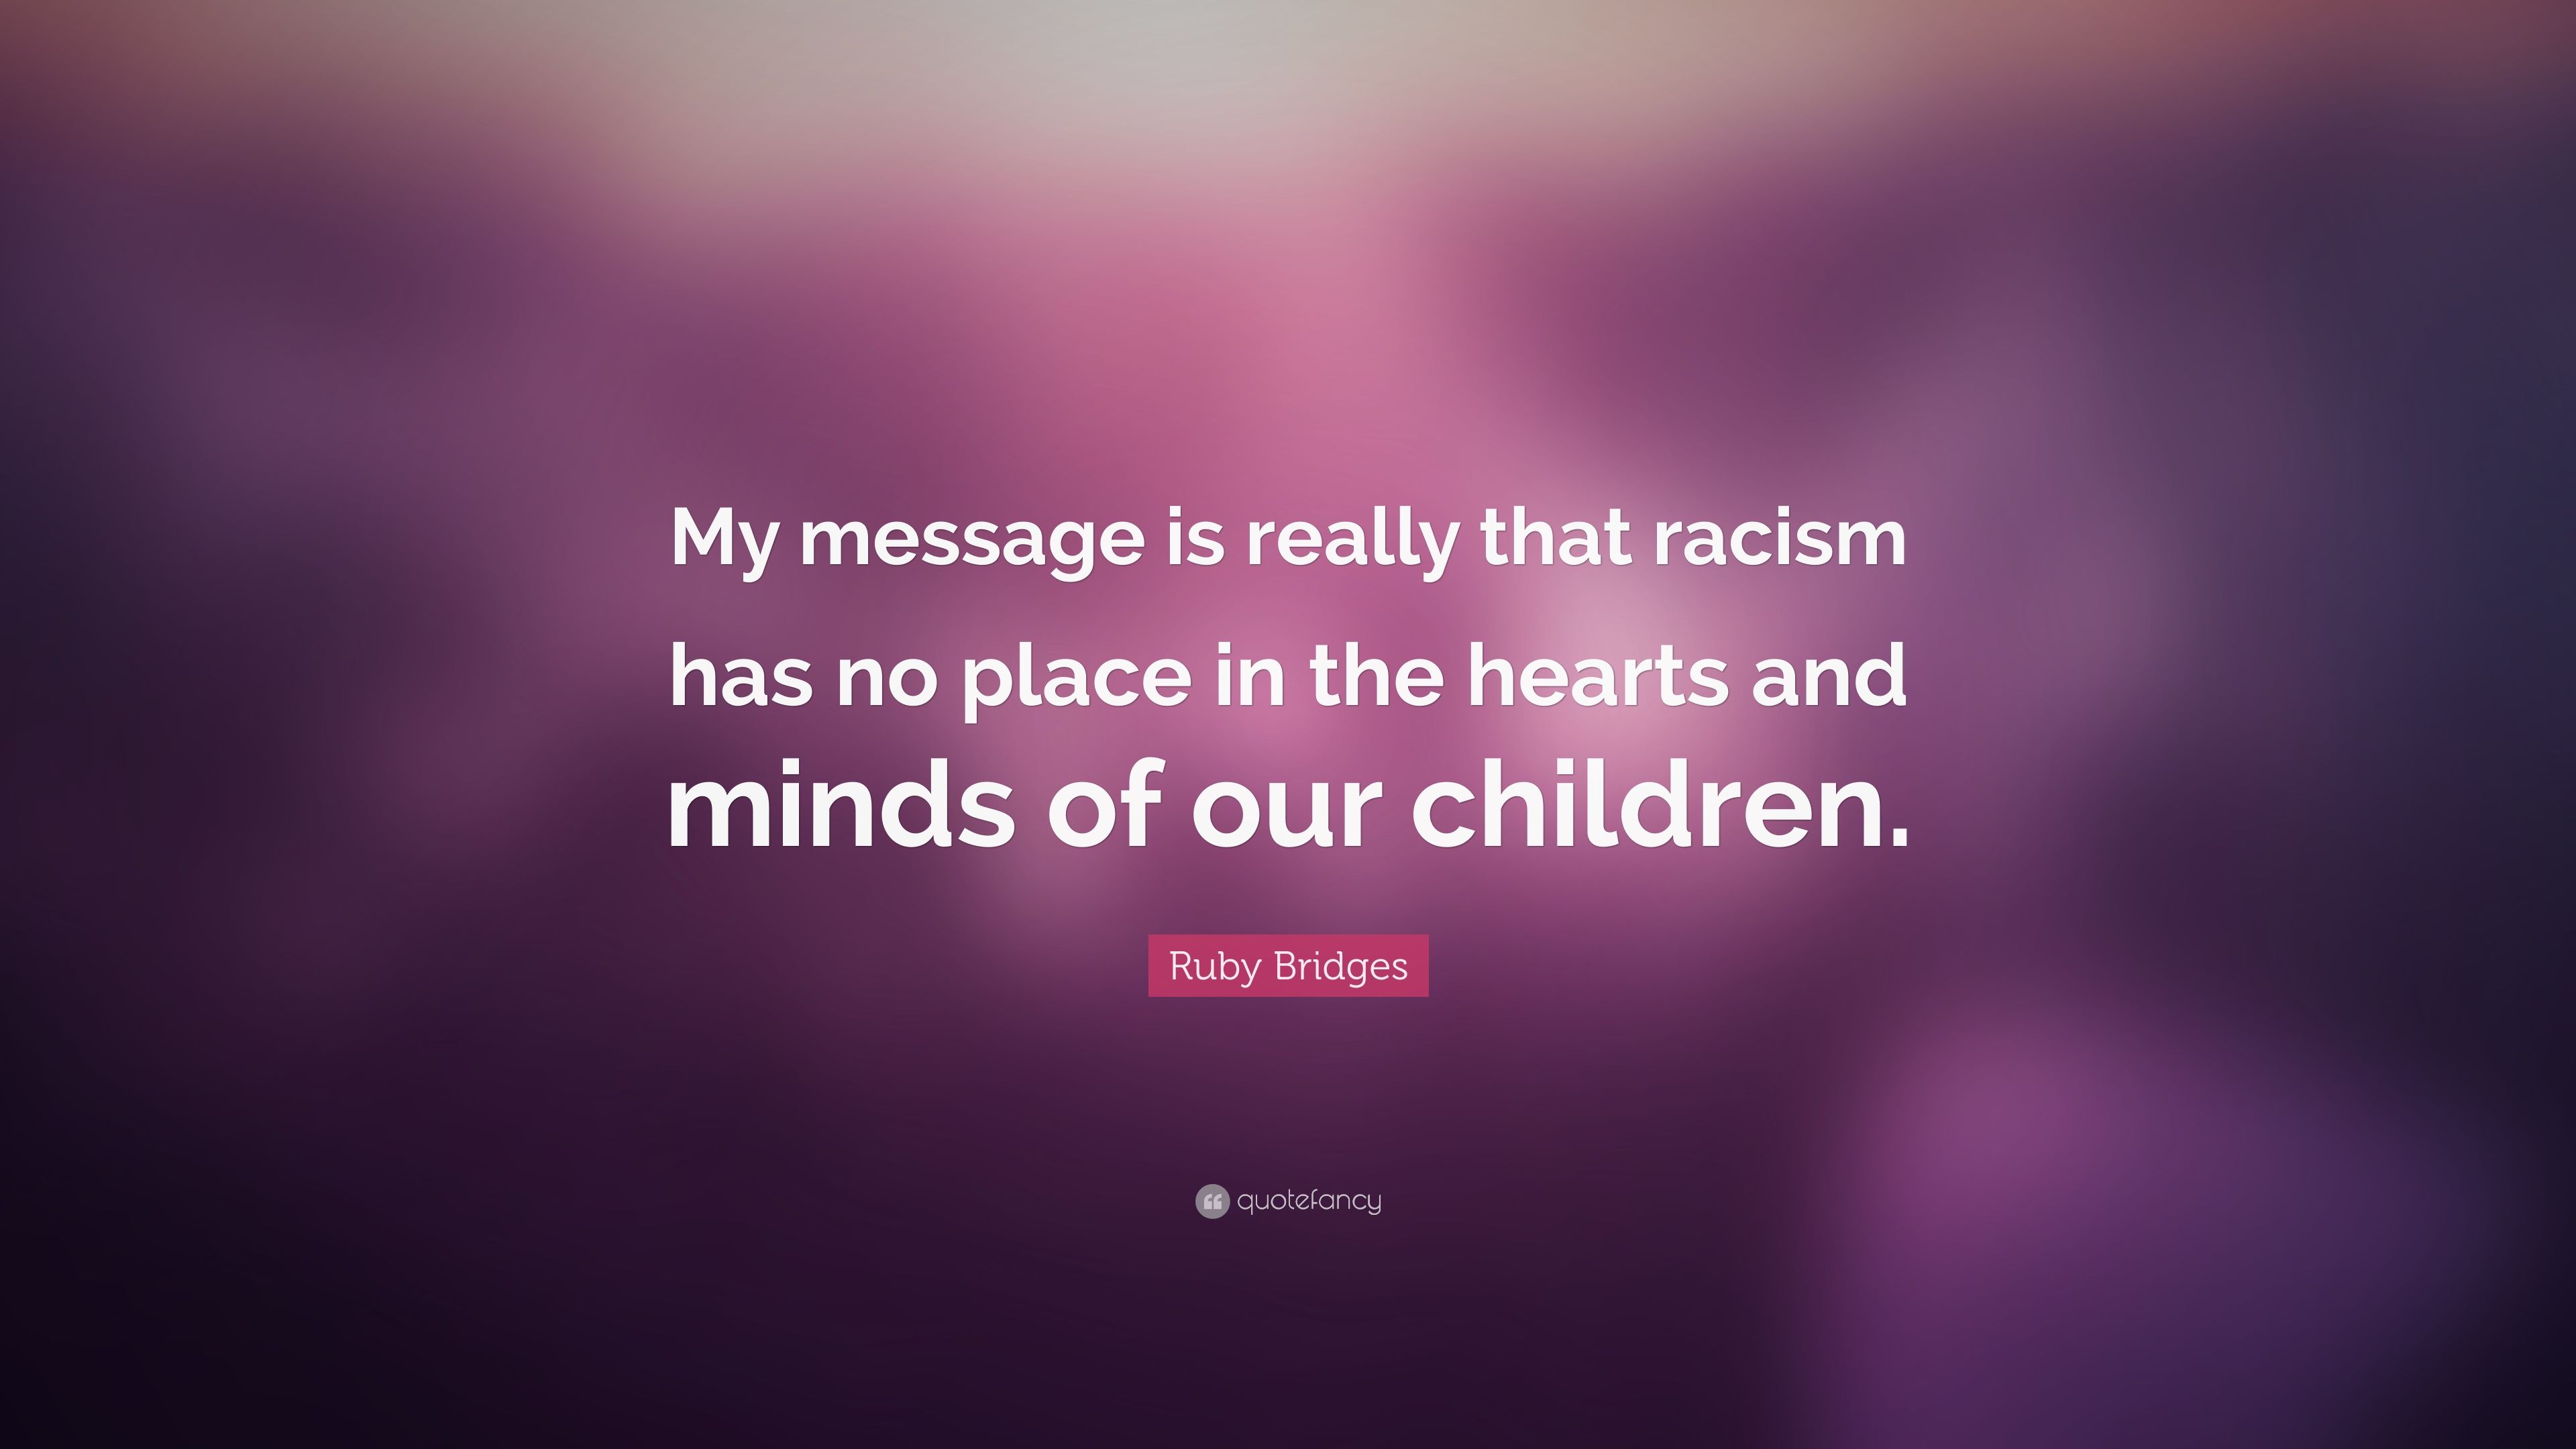 Ruby Bridges Quote: “My message is really that racism has no place